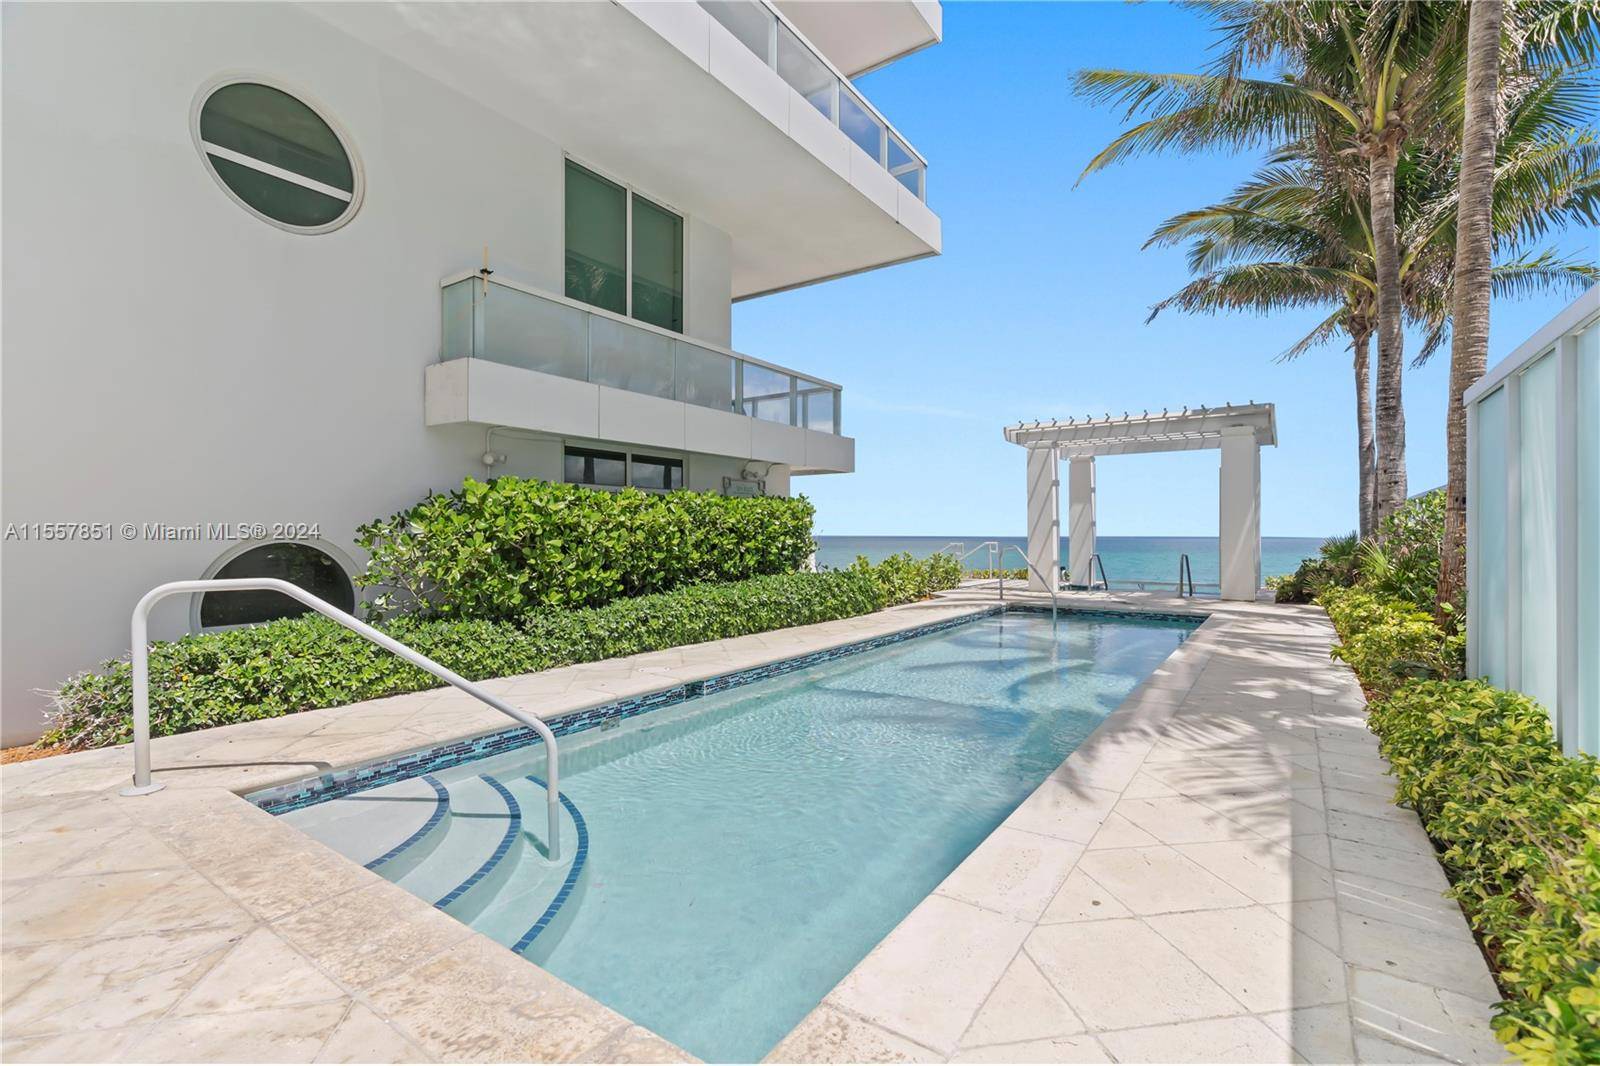 Embrace luxury living at the prestigious Fontainebleau resort in this oceanfront, furnished turnkey 5BD 6.